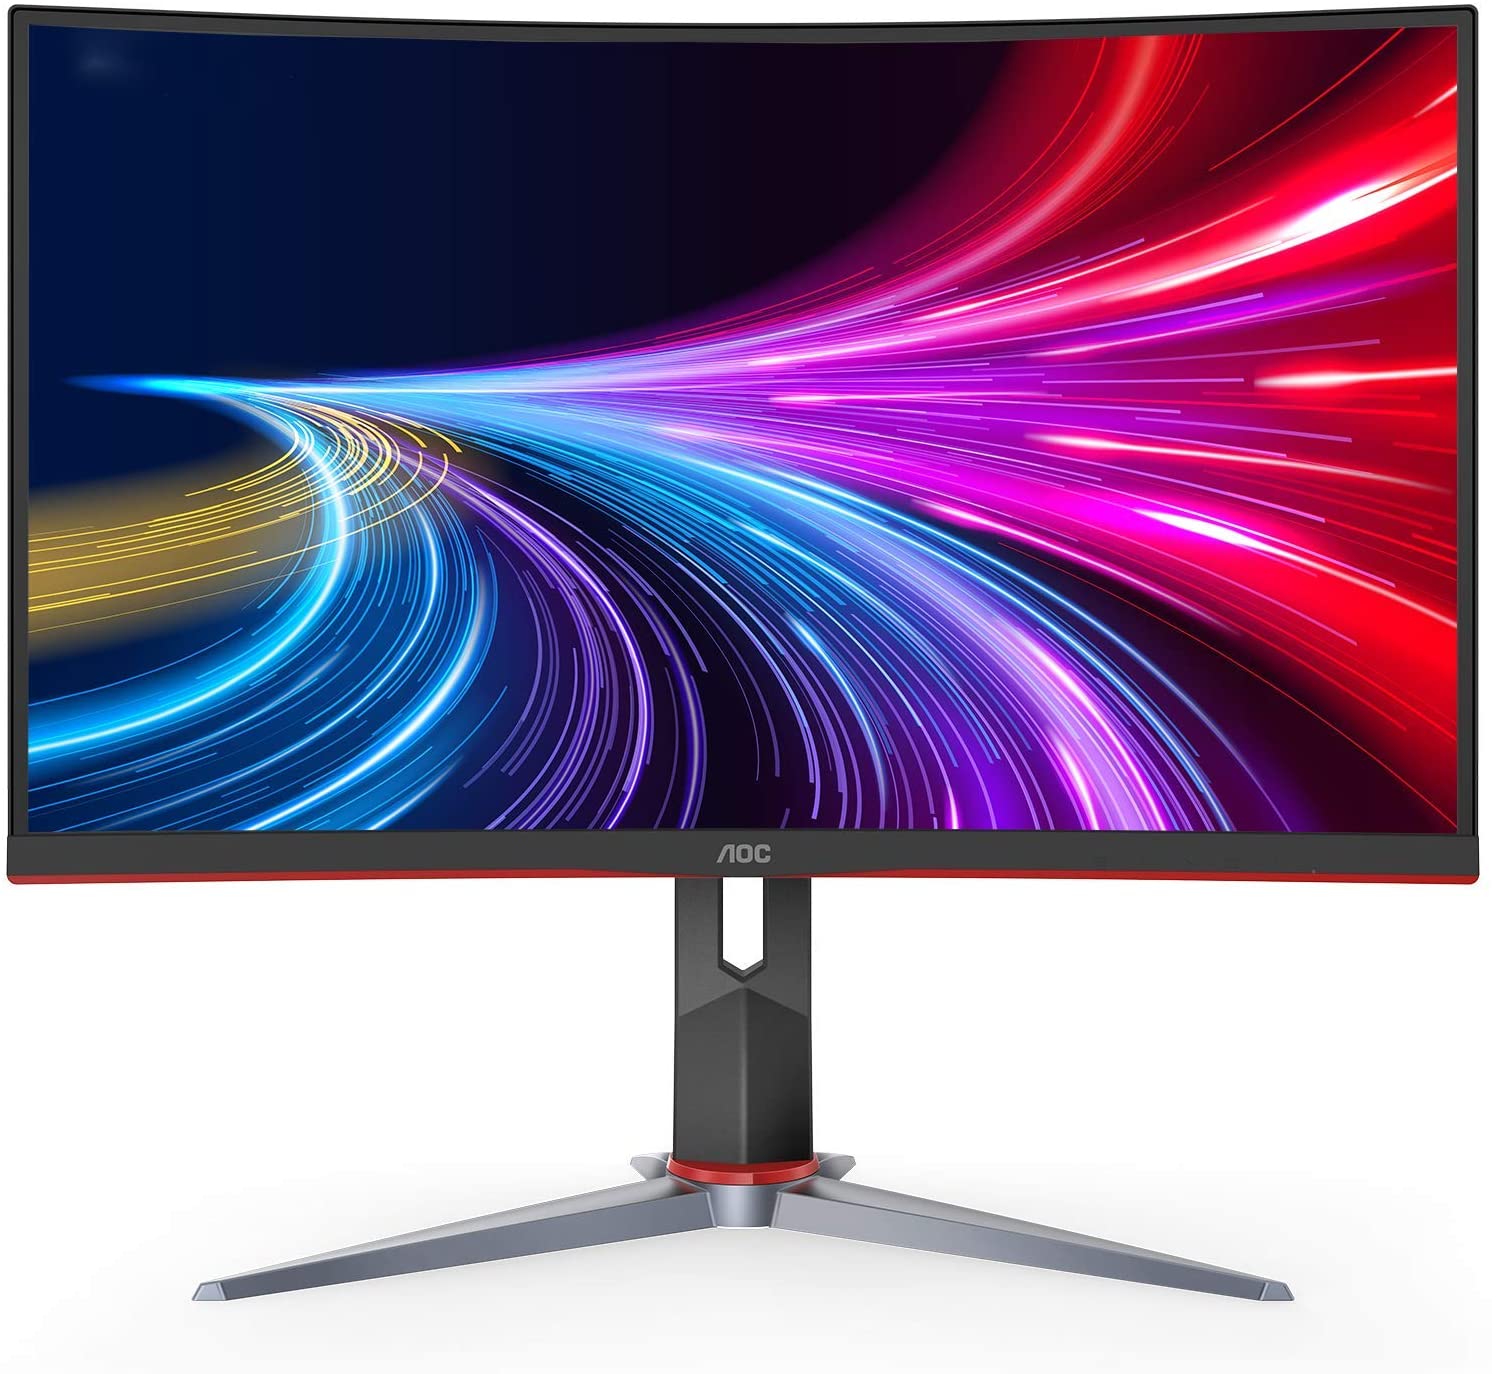 Best Computer Monitors for Gaming - AOC C27G2Z 27" Curved Frameless Ultra-Fast Gaming Monitor